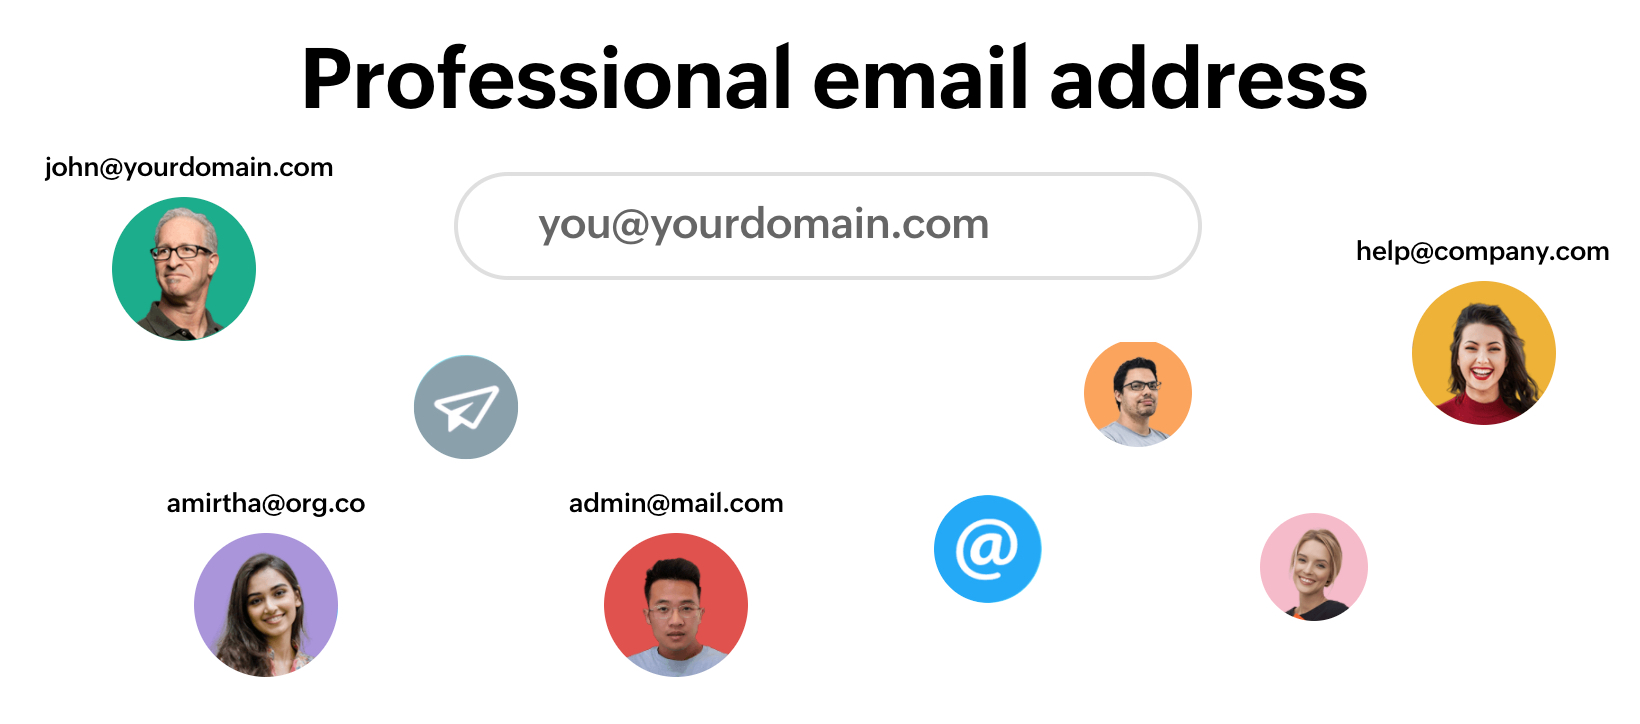 What email domain looks most professional?